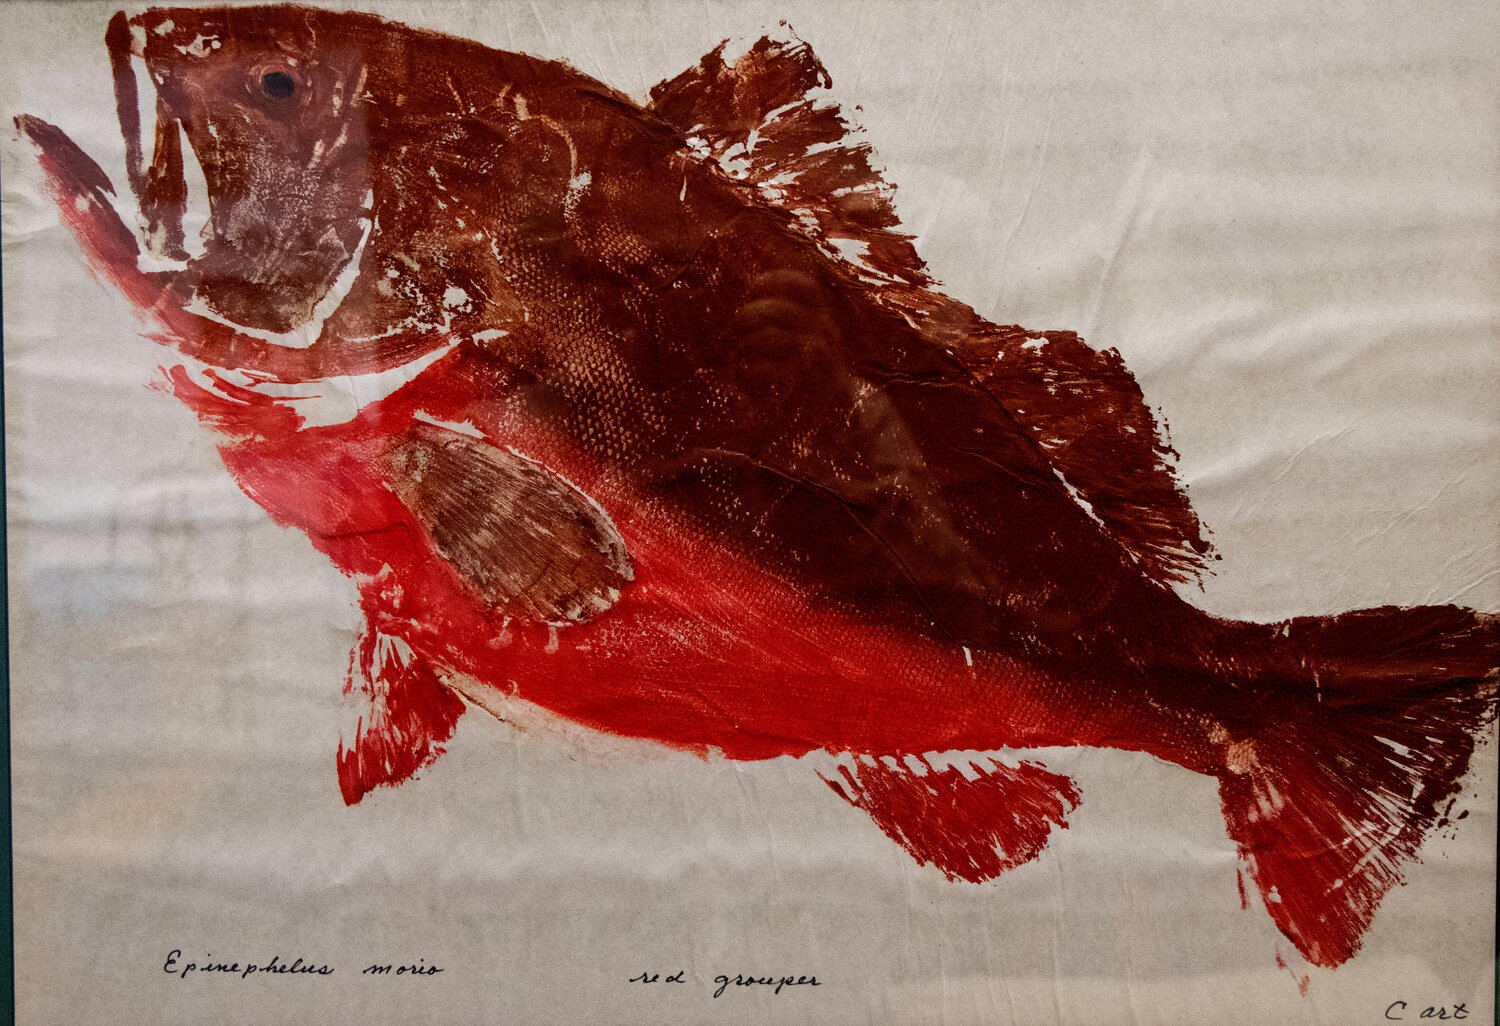 A fish print of a grouper, a popular eating fish in Florida.